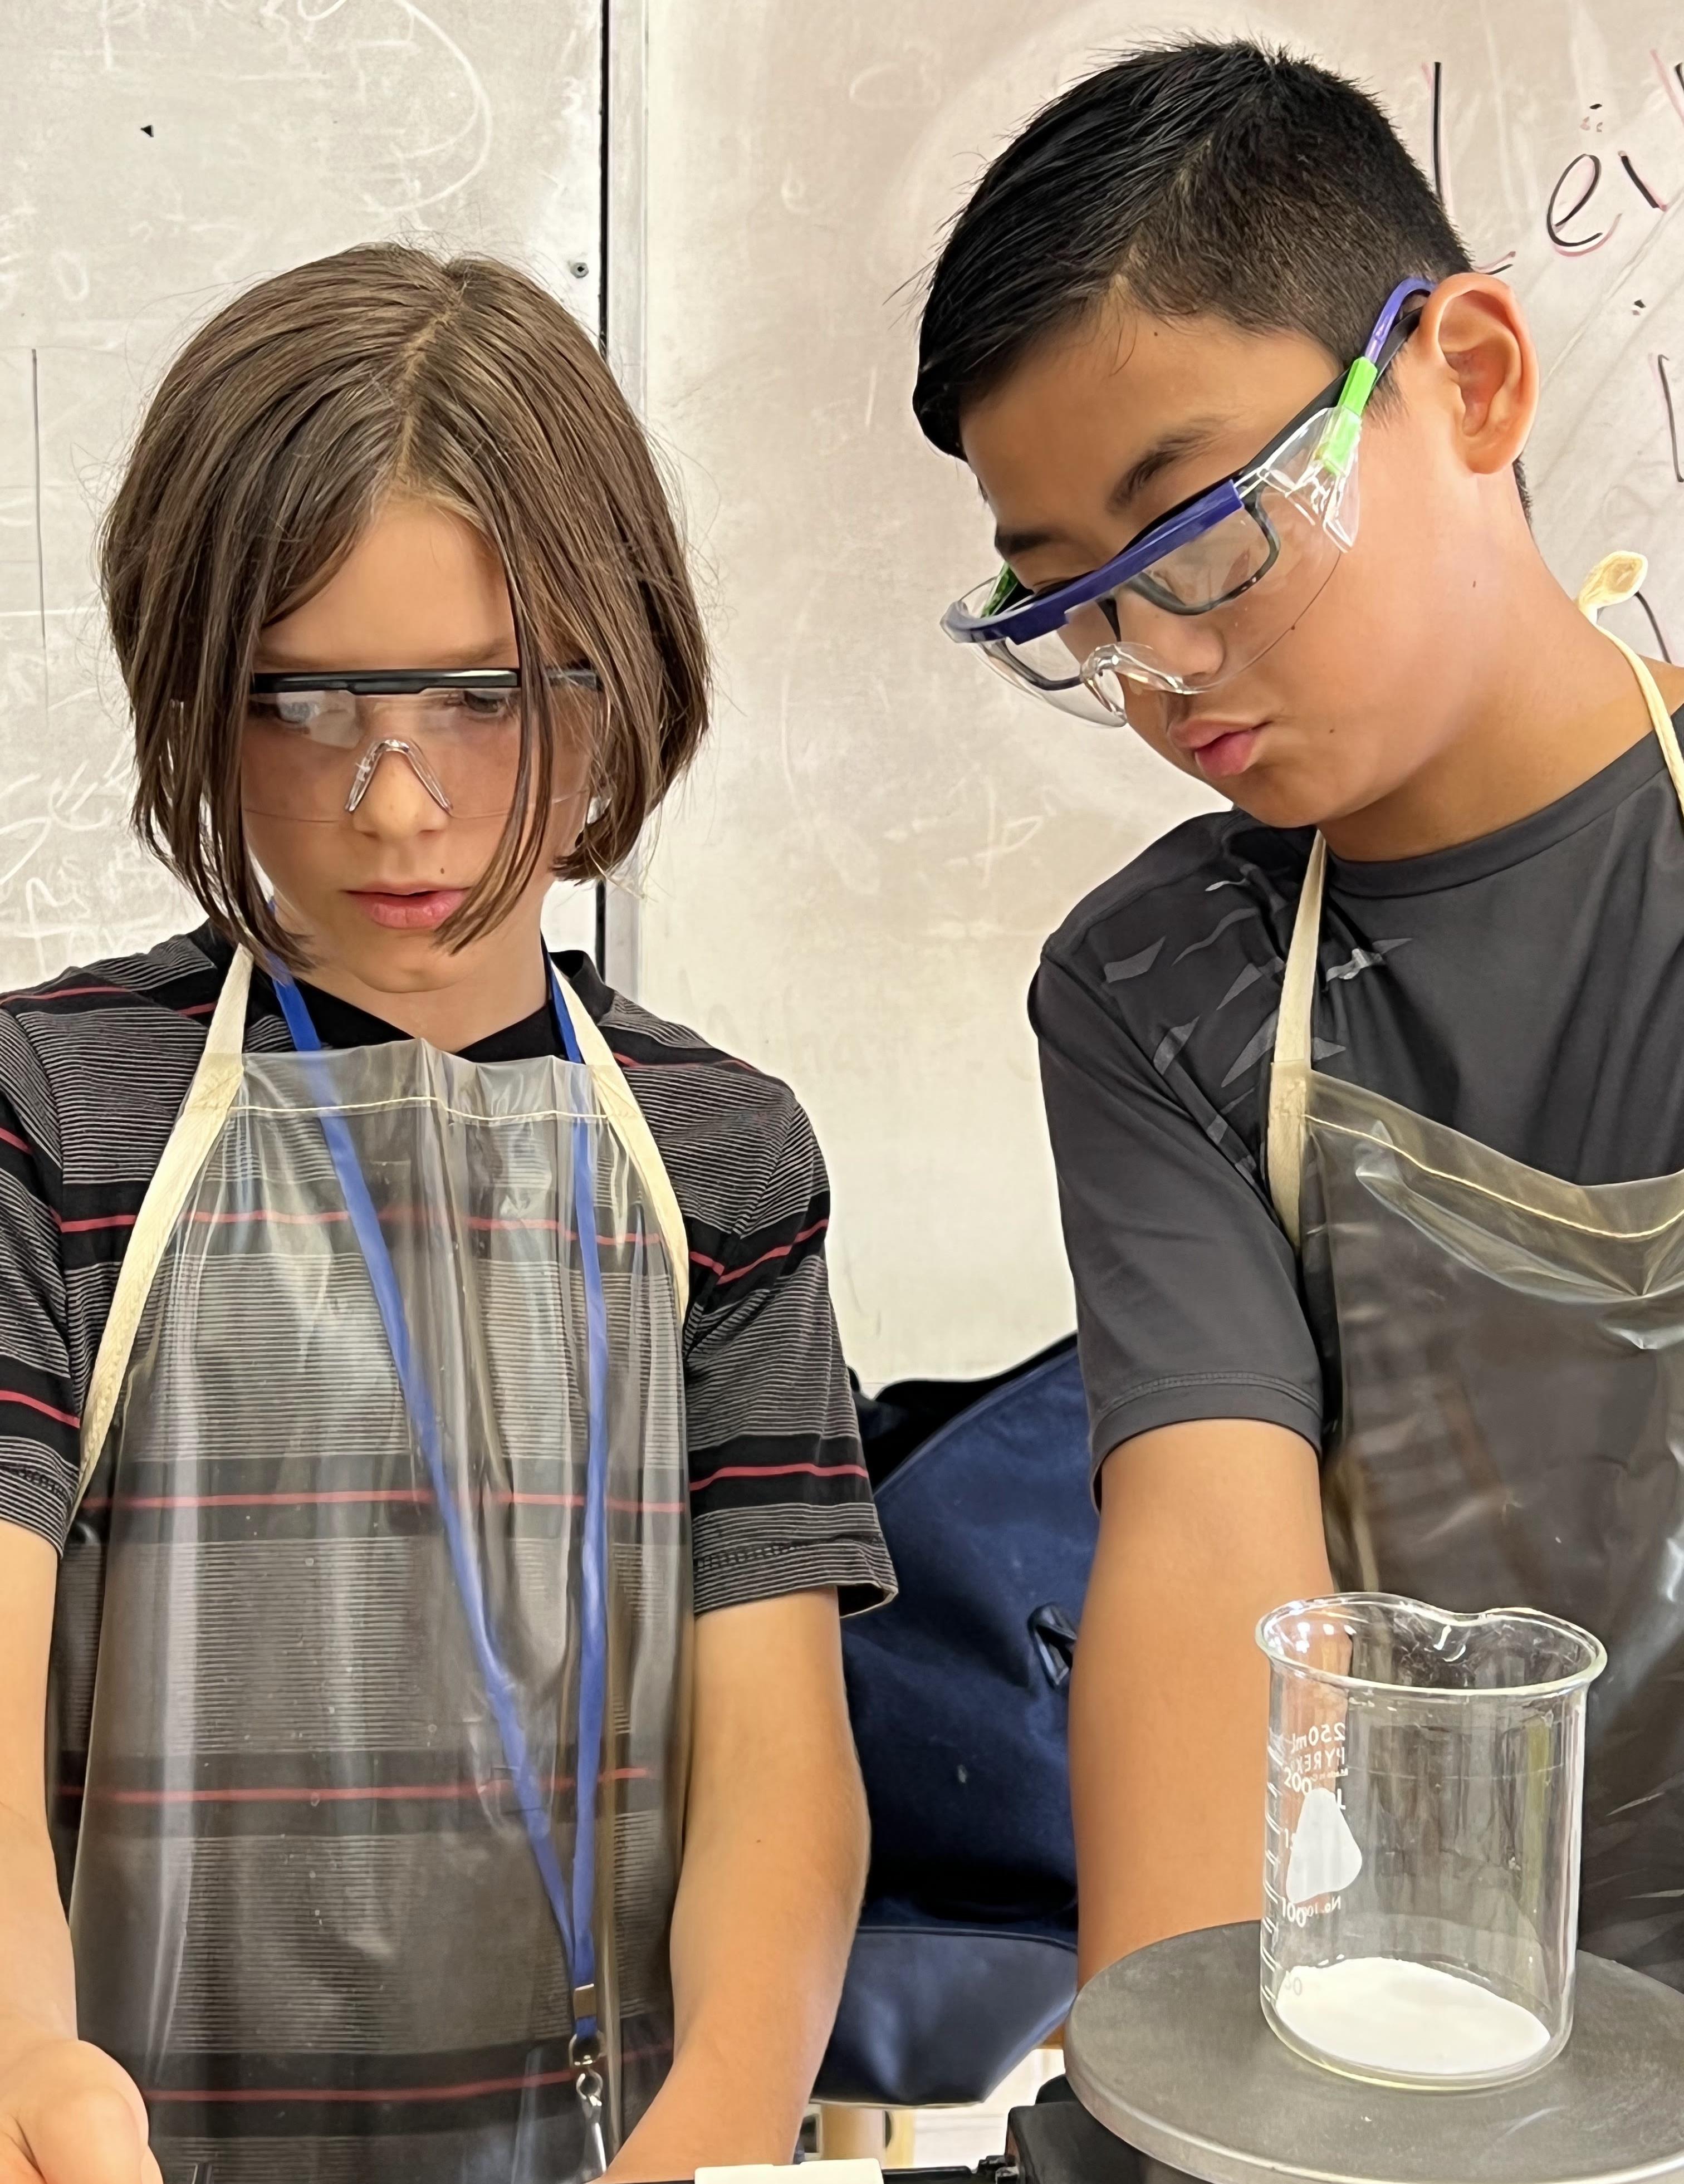 two students in science gear working on an experiment